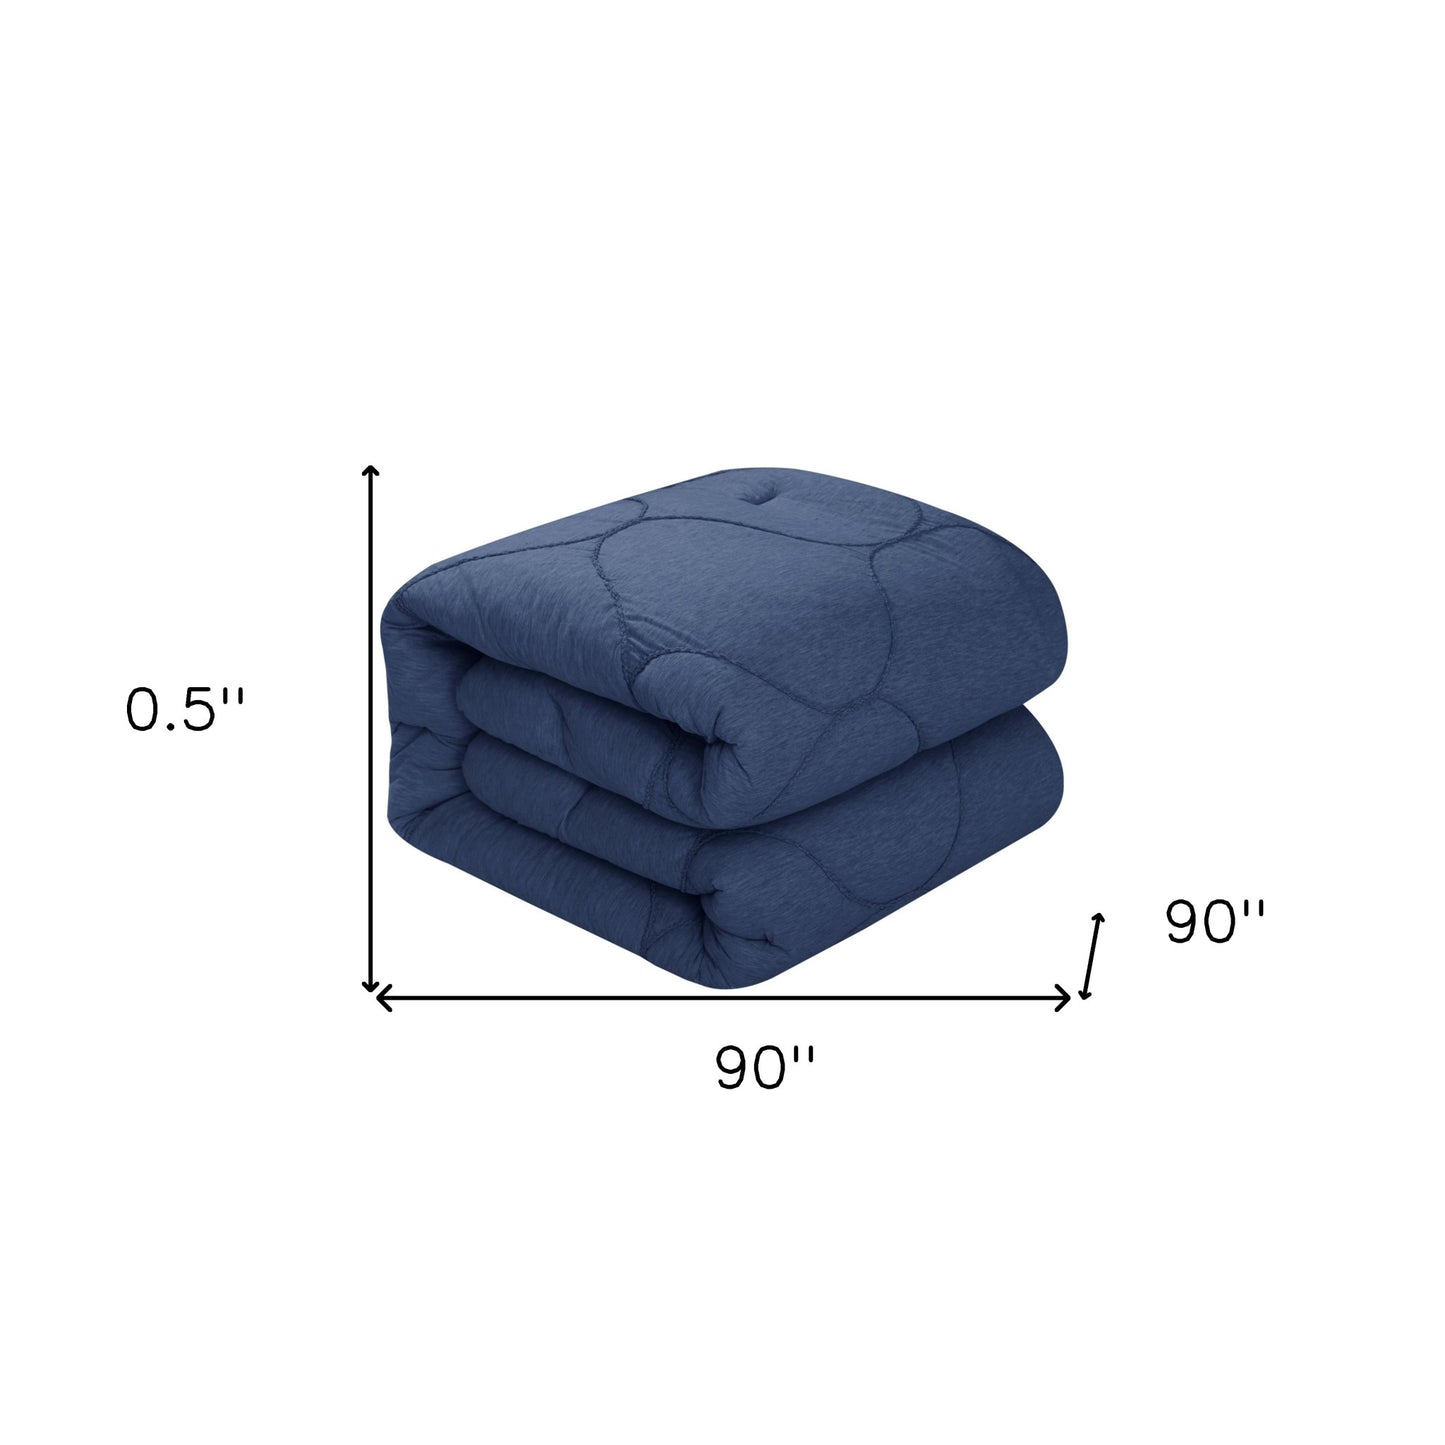 Navy Blue Queen Polyester 180 Thread Count Washable Down Comforter Set